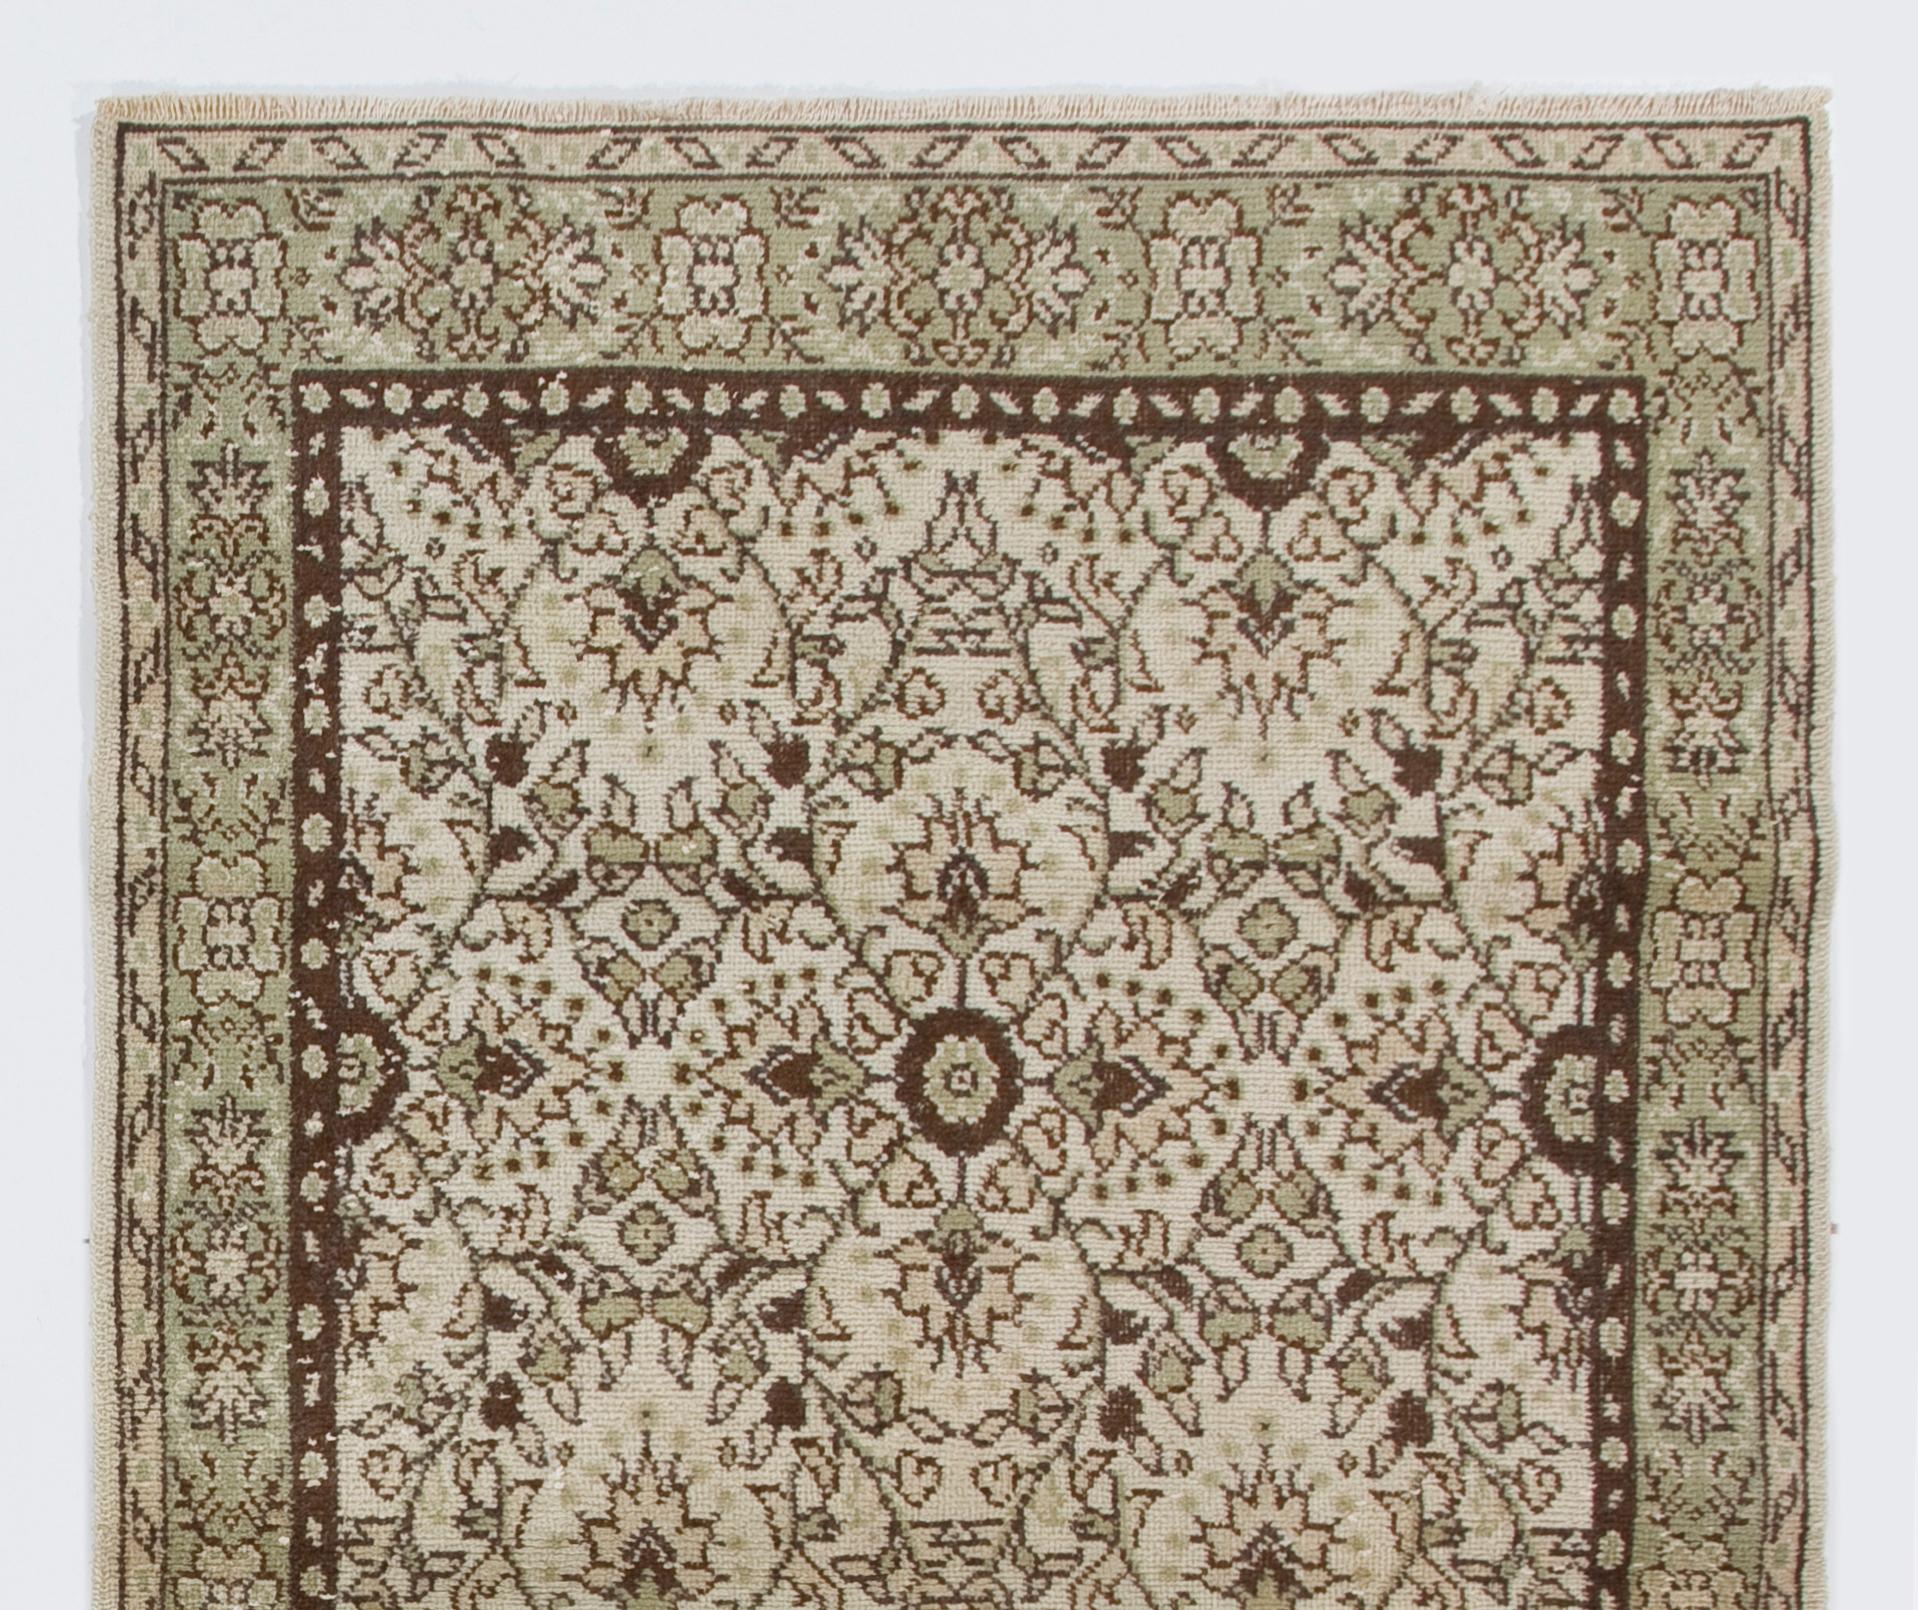 Oushak 4x6.8 Ft Handmade Vintage Floral Rug in Ivory, Brown and Soft Faded Green Color For Sale